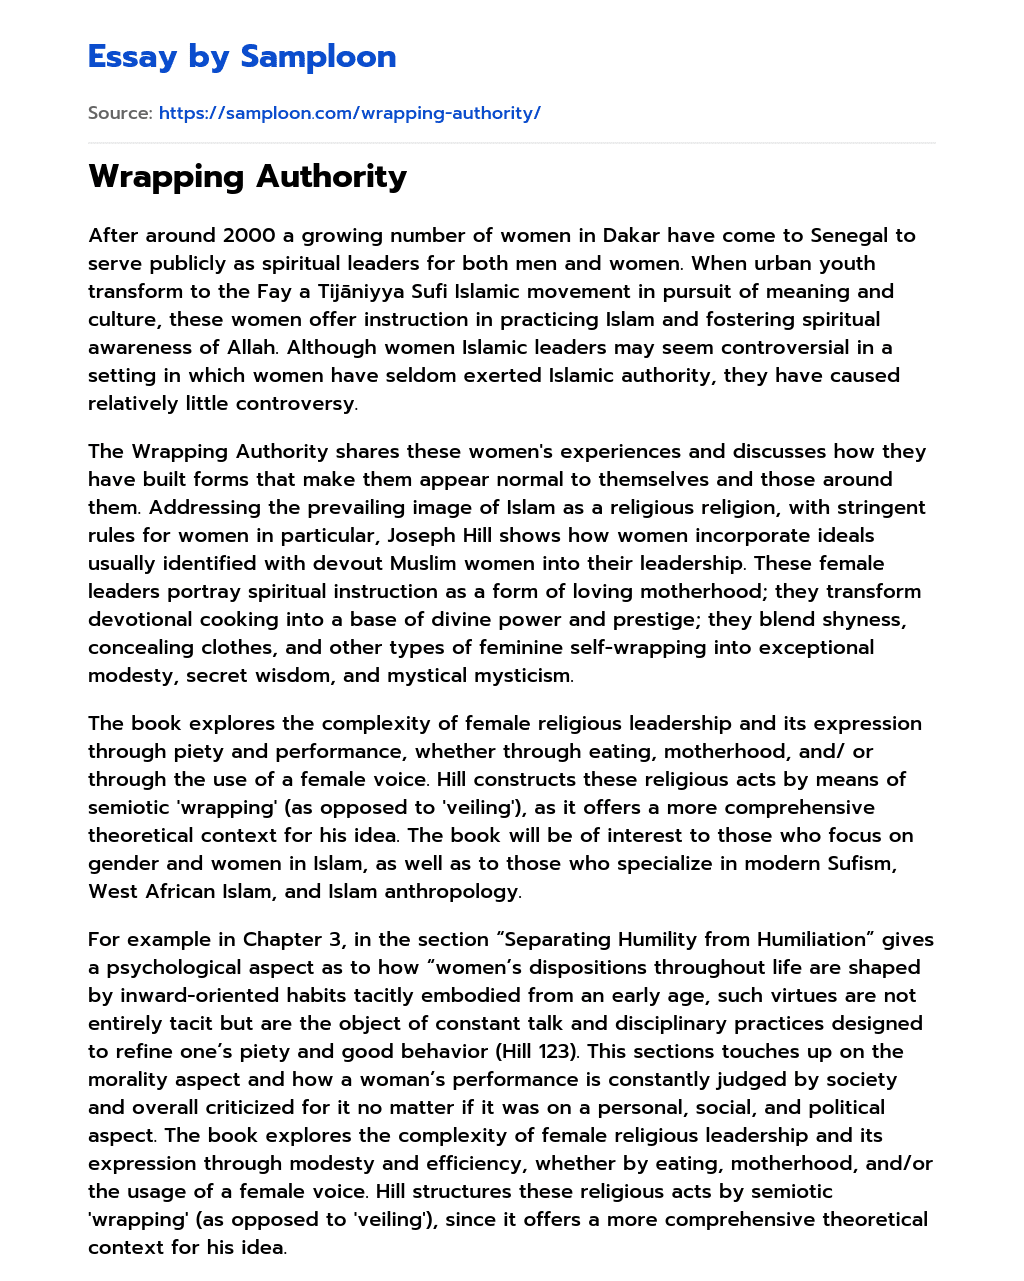 Wrapping Authority essay